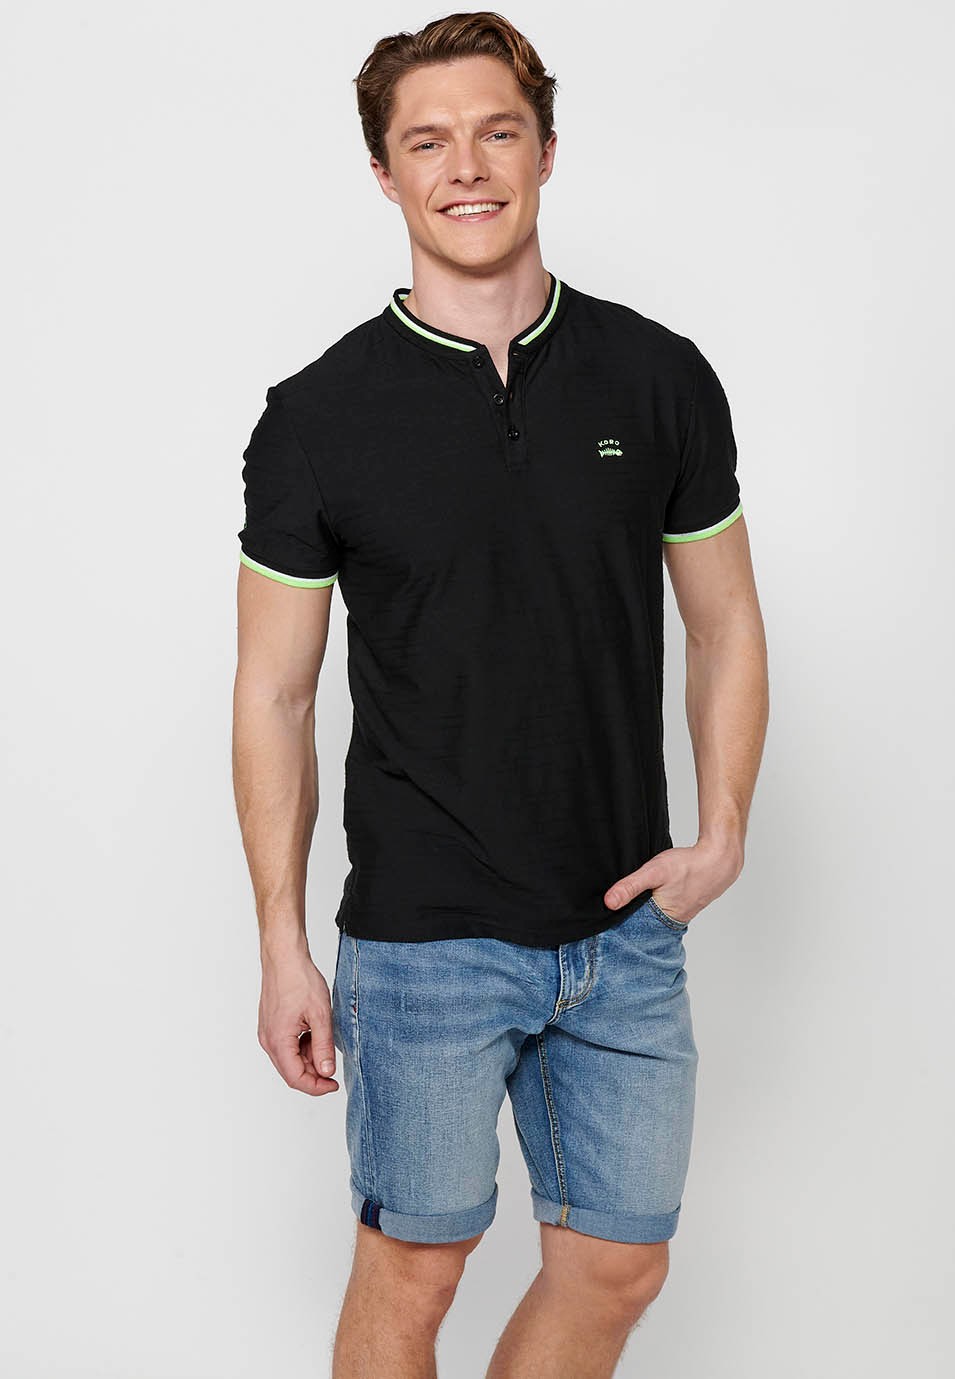 Short-sleeved Polo Shirt with Round Neck with buttoned opening and Finish with side slits in Black for Men 7